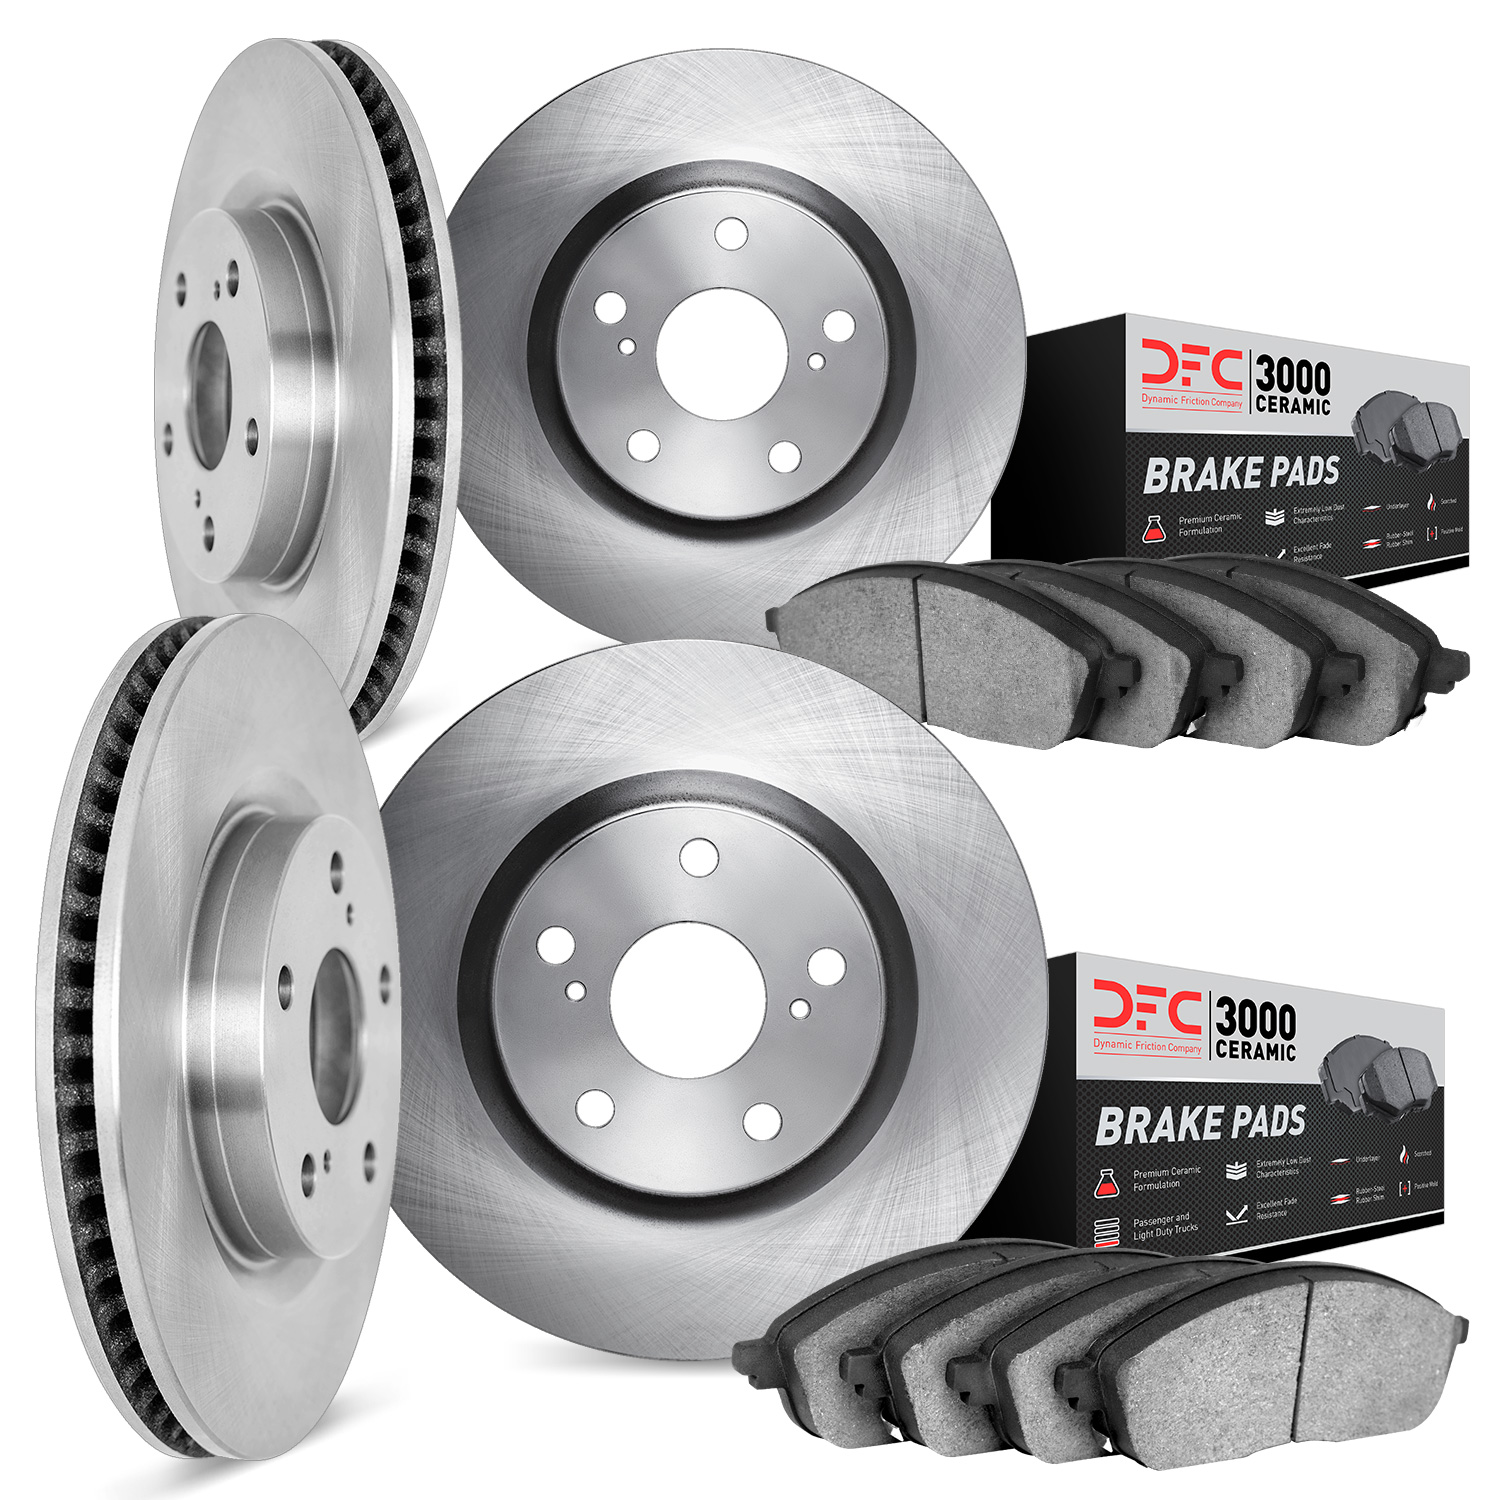 6304-68006 Brake Rotors with 3000-Series Ceramic Brake Pads Kit, 2005-2014 Infiniti/Nissan, Position: Front and Rear